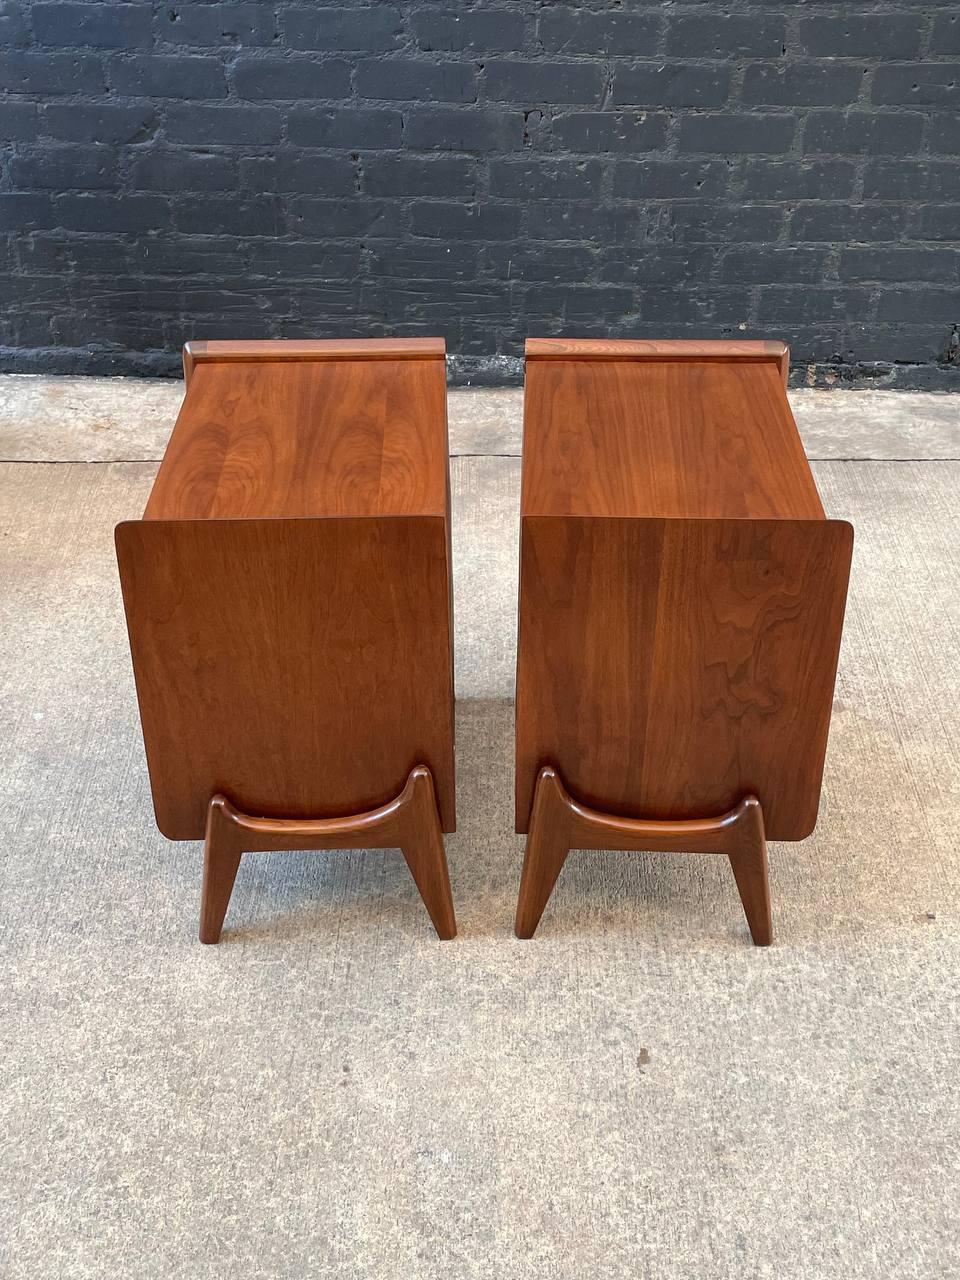 Newly Refinished - Pair of Mid-Century Modern Sculpted Walnut Night Stands 2